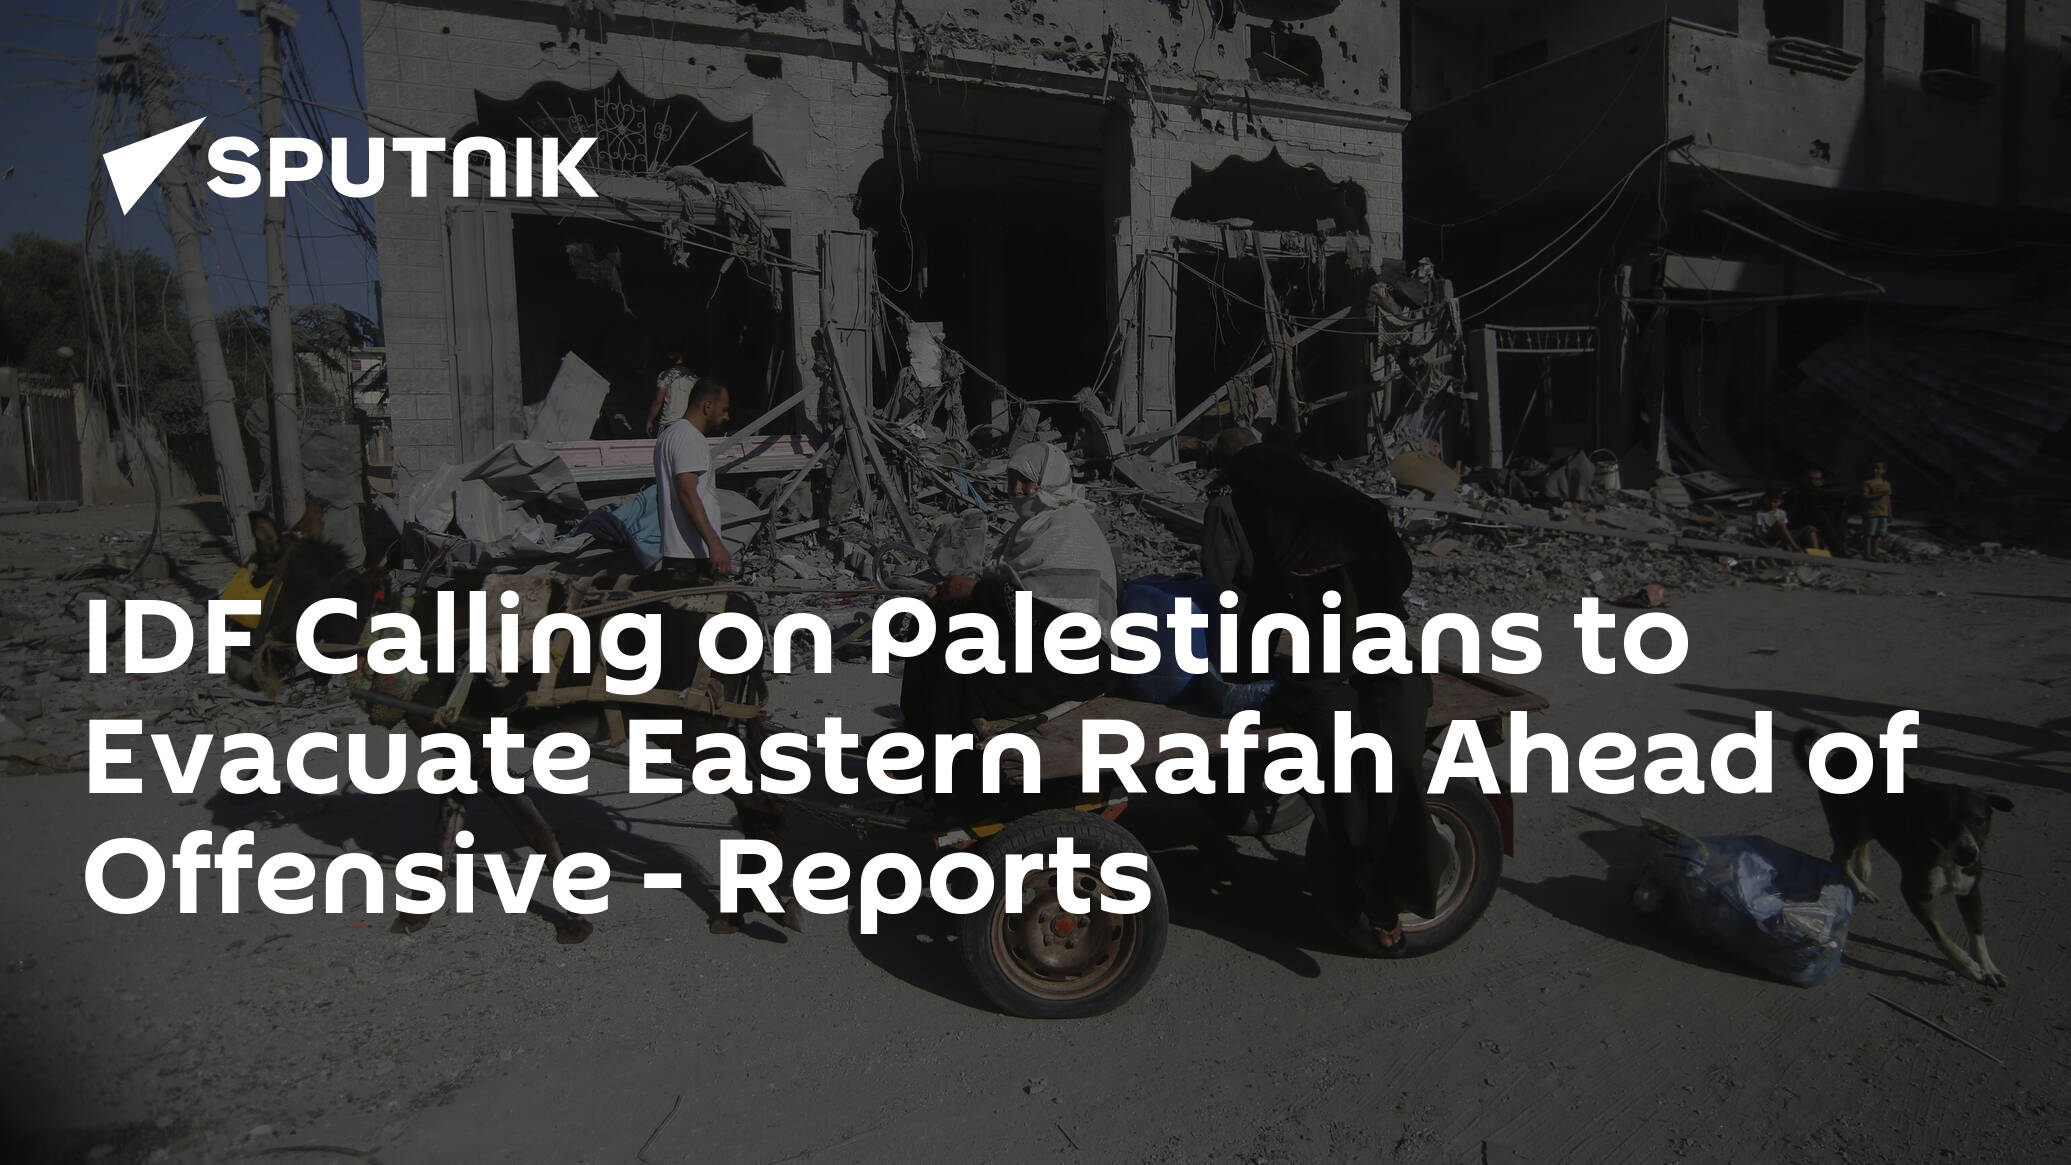 IDF Calling on Palestinians to Evacuate Eastern Rafah Ahead of Offensive – Reports